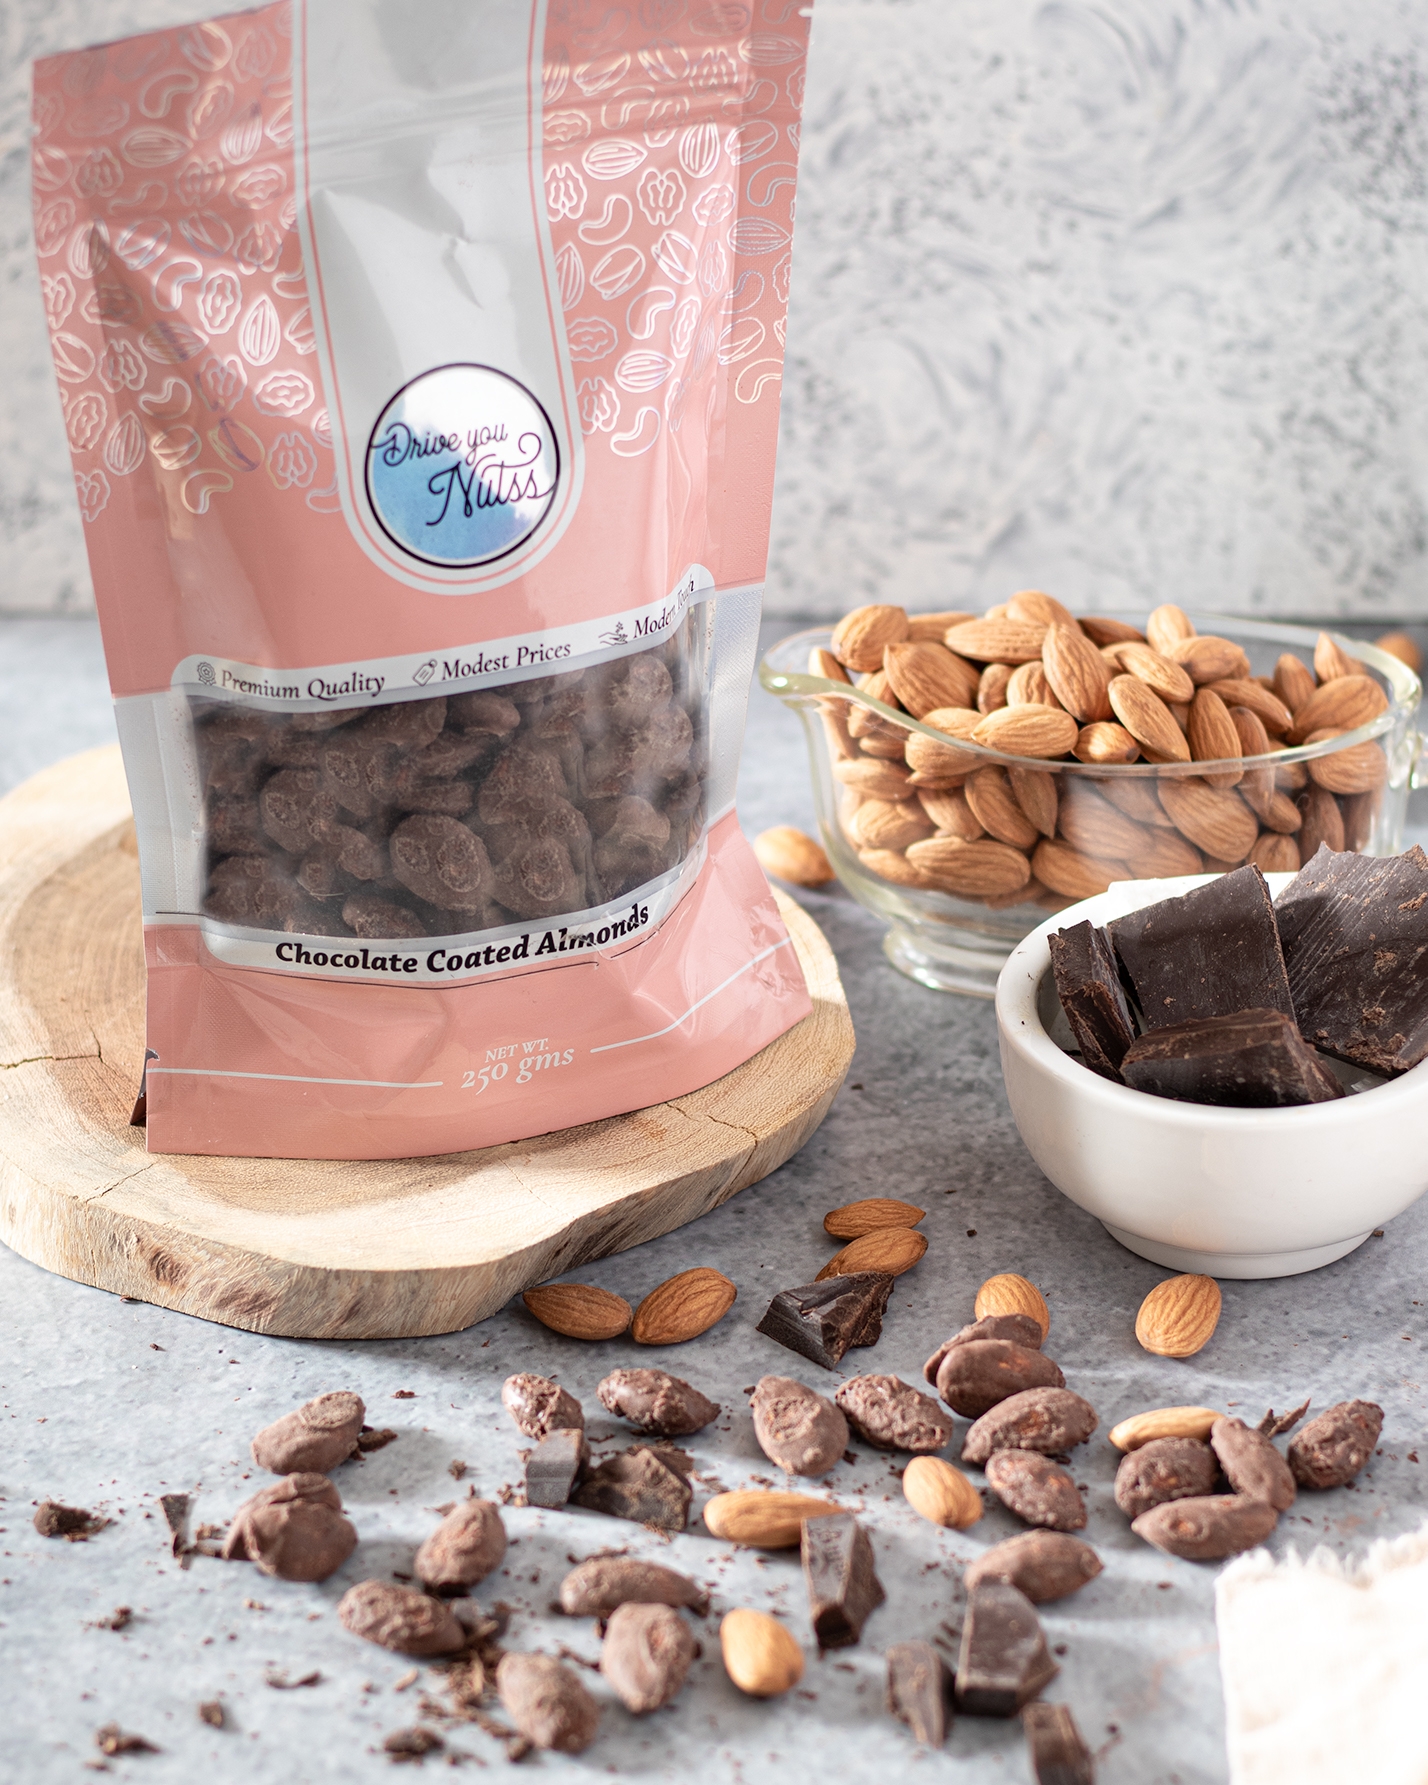 Chocolate coated Almonds (250 Gms)